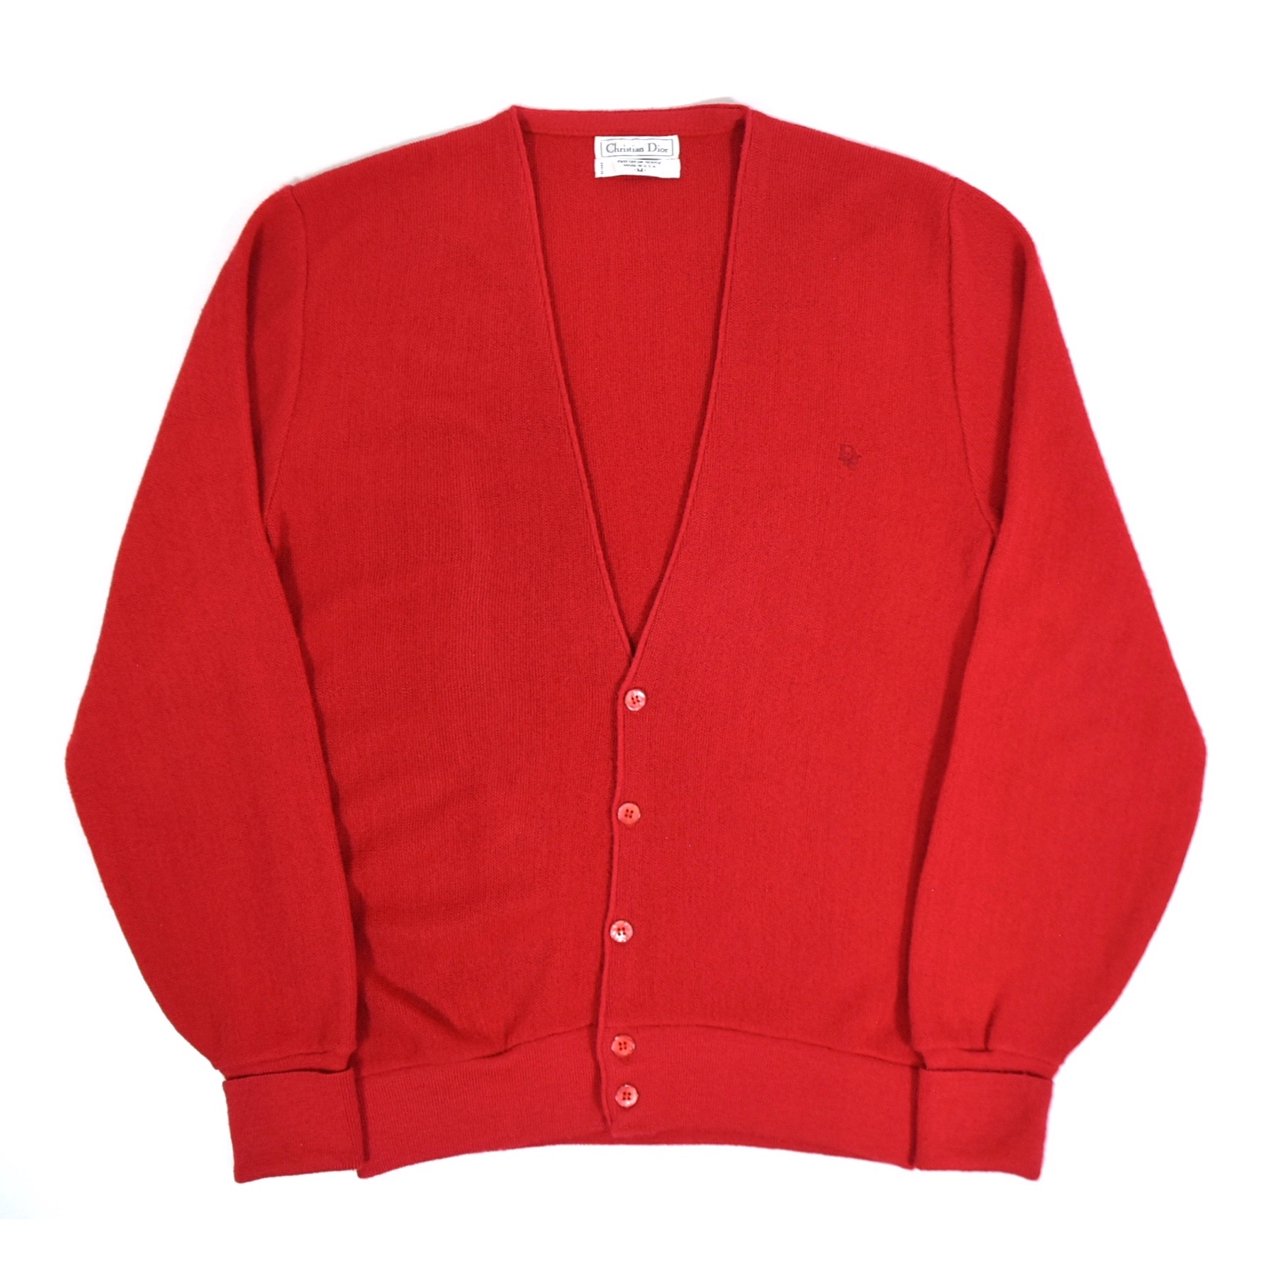 1980s Christian Dior Acrylic knit cardigan M MADE IN USA Red ...